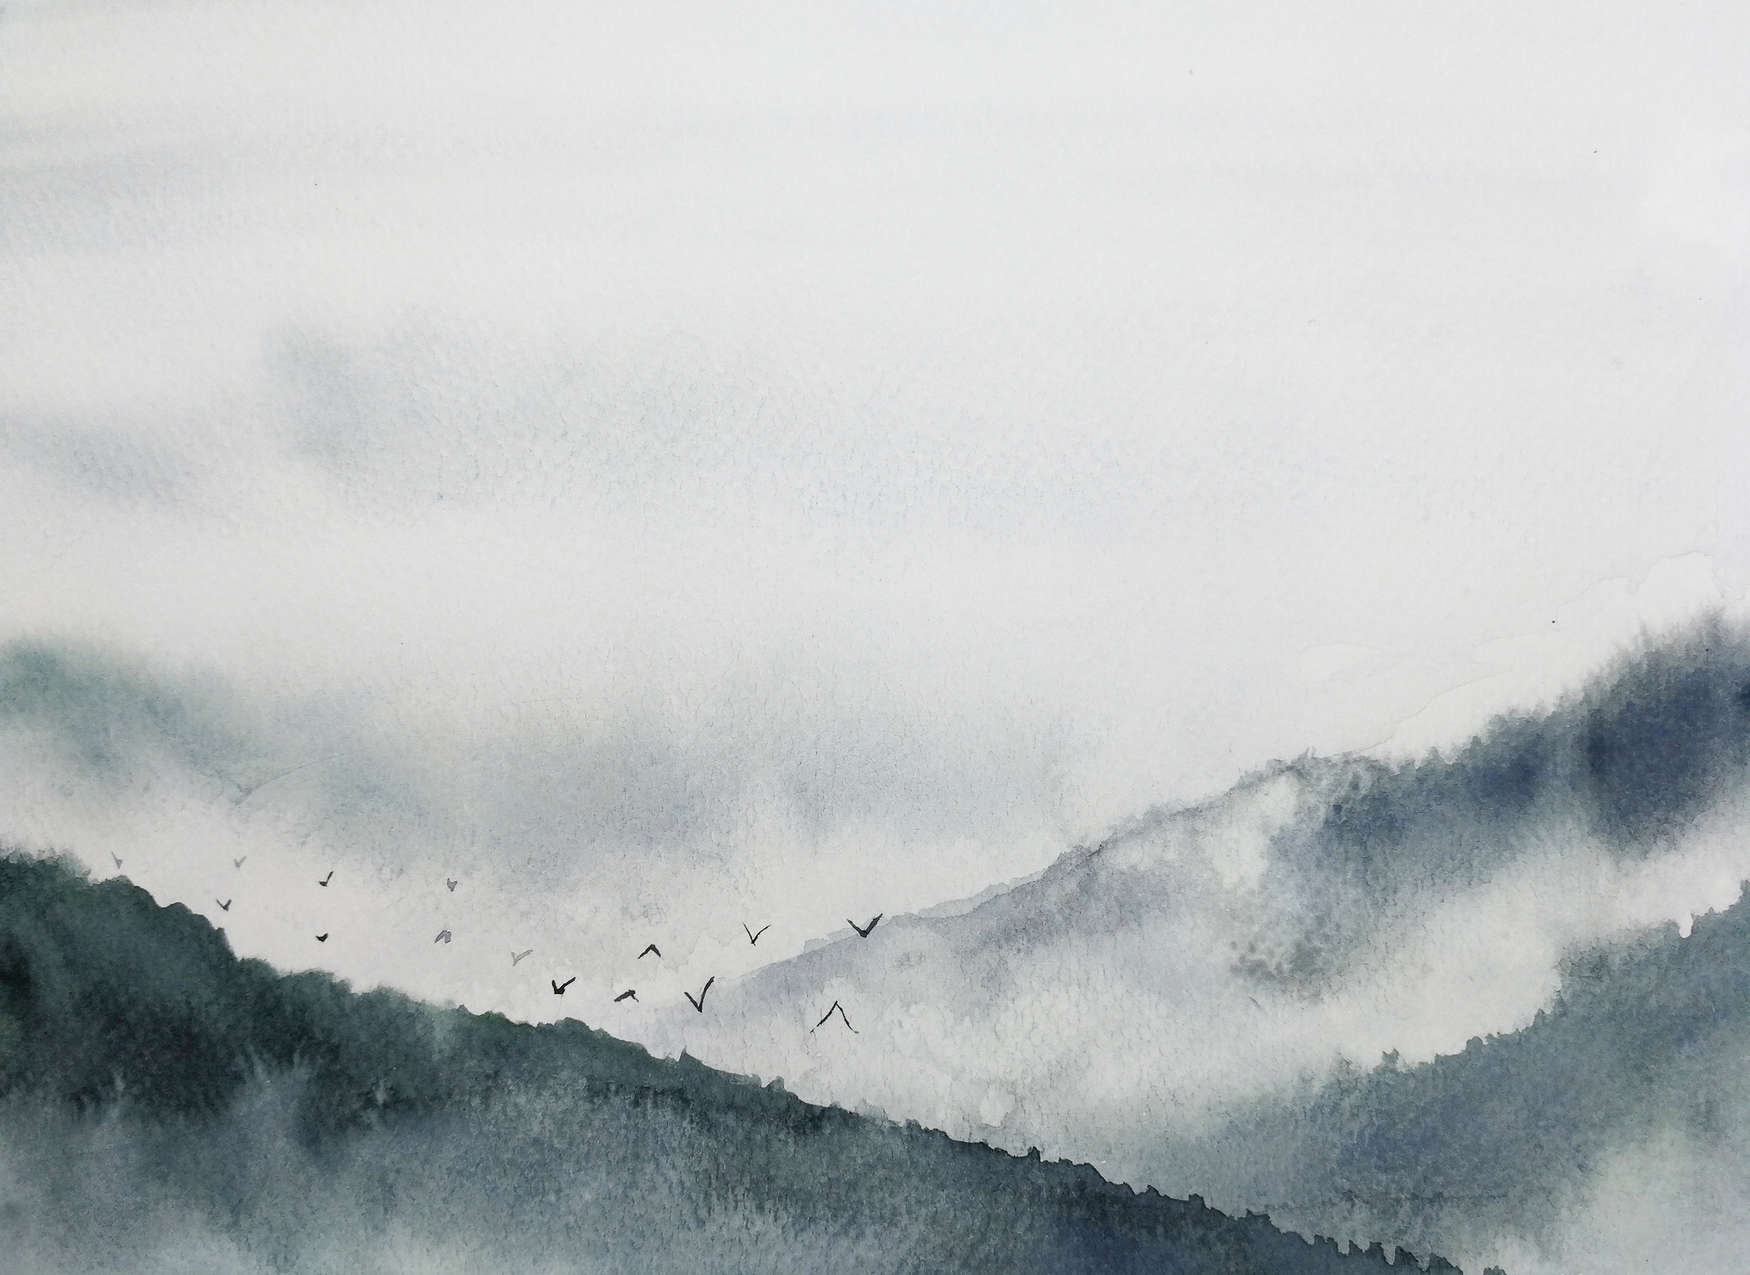             Foggy landscape in painting style - grey, black
        